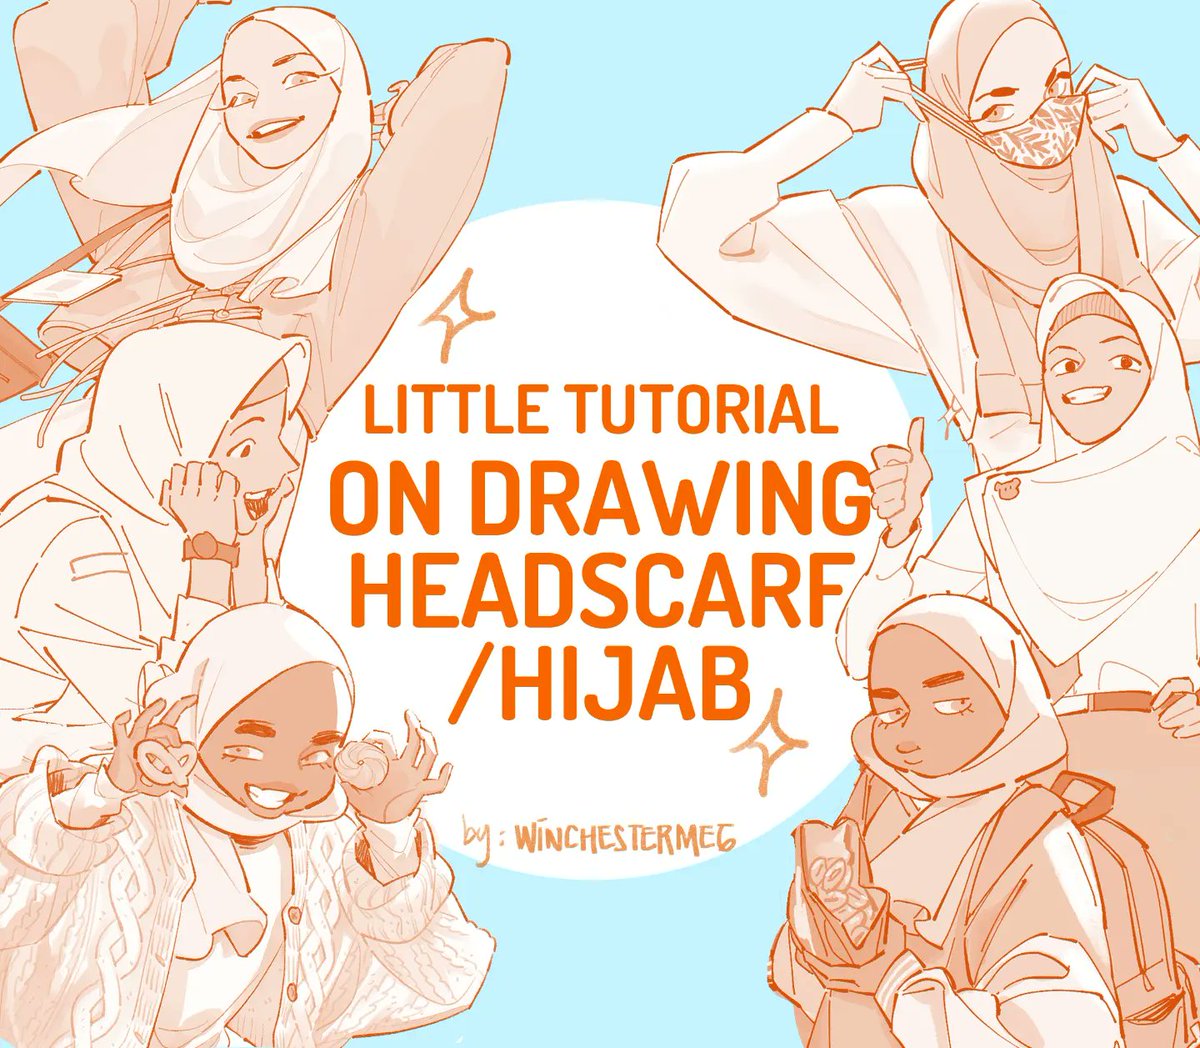 I made a little tutorial on drawing headscarf/hijab   Part 1/2